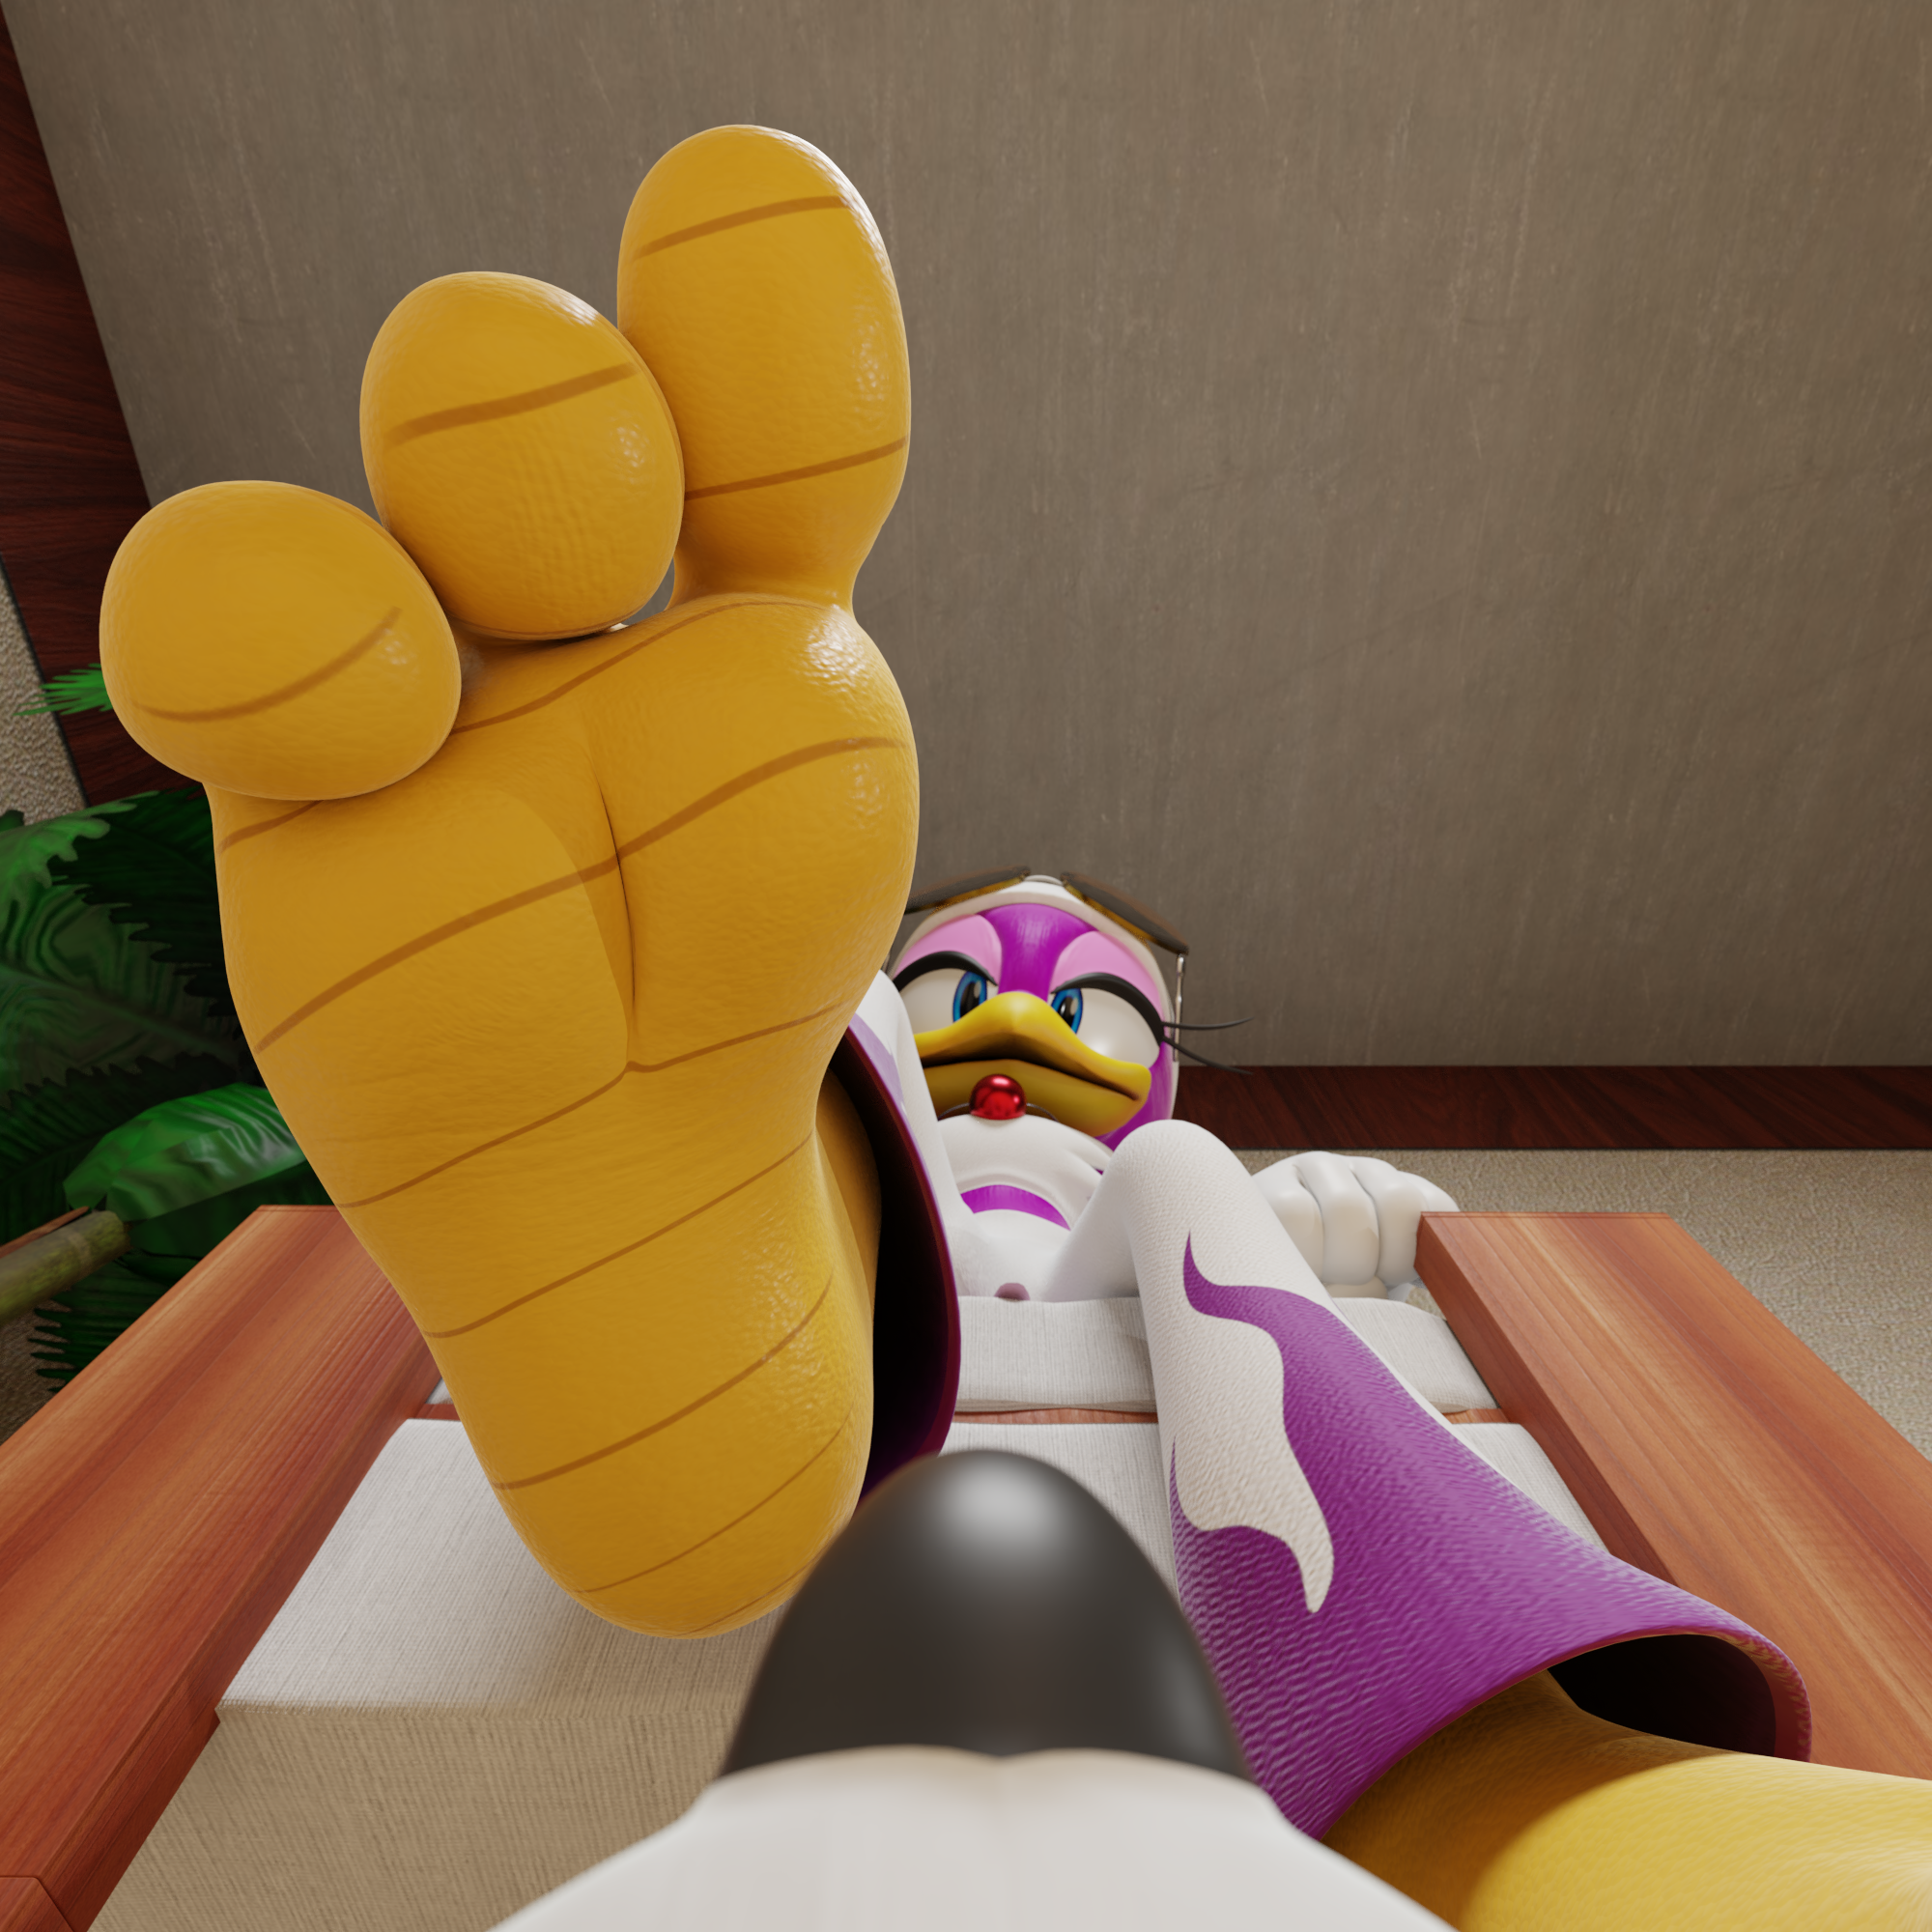 3D] Inside Shadow's Shoes by FeetyMcFoot -- Fur Affinity [dot] net